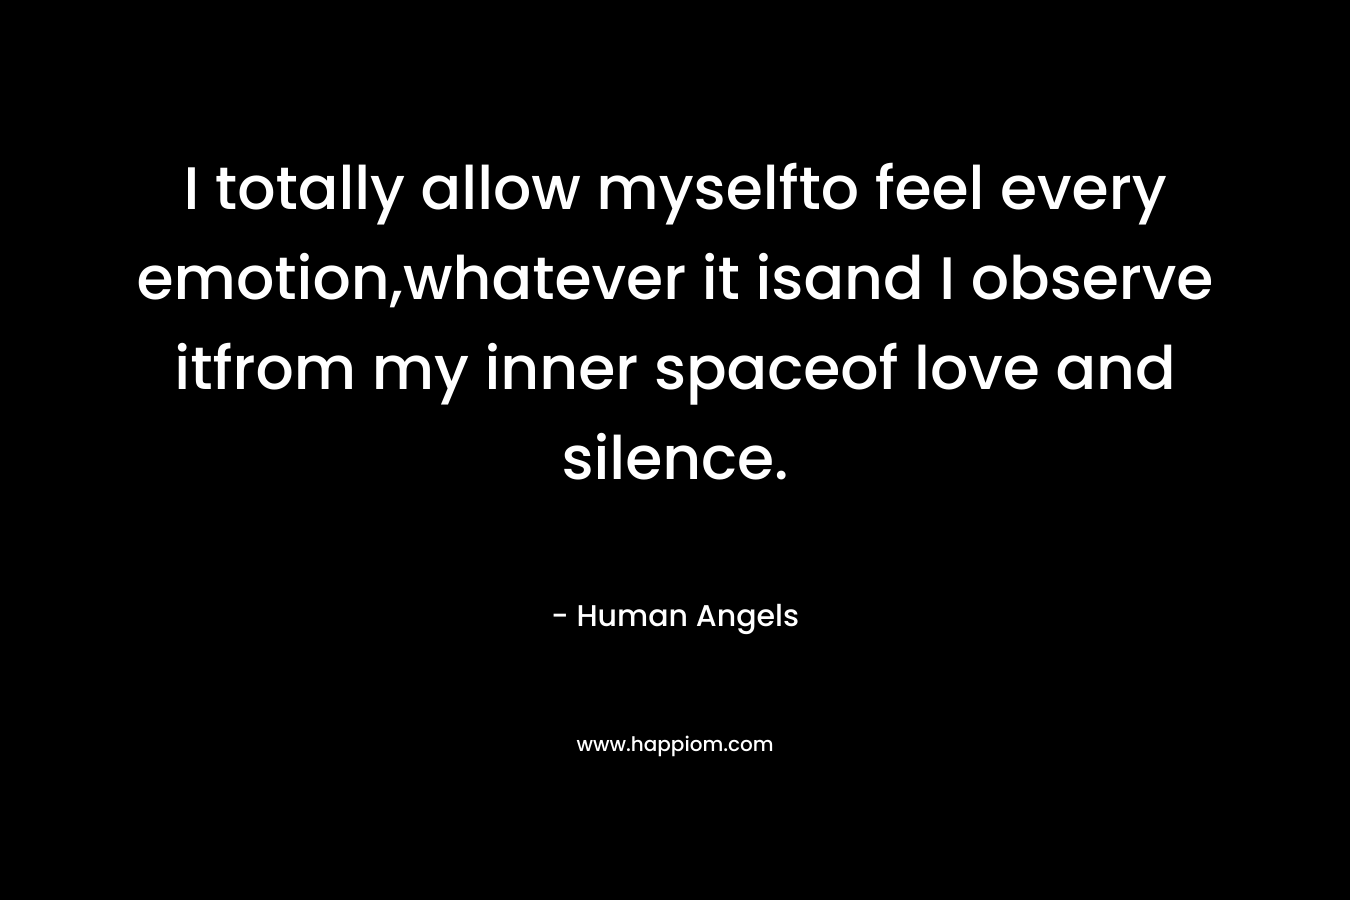 I totally allow myselfto feel every emotion,whatever it isand I observe itfrom my inner spaceof love and silence. – Human Angels